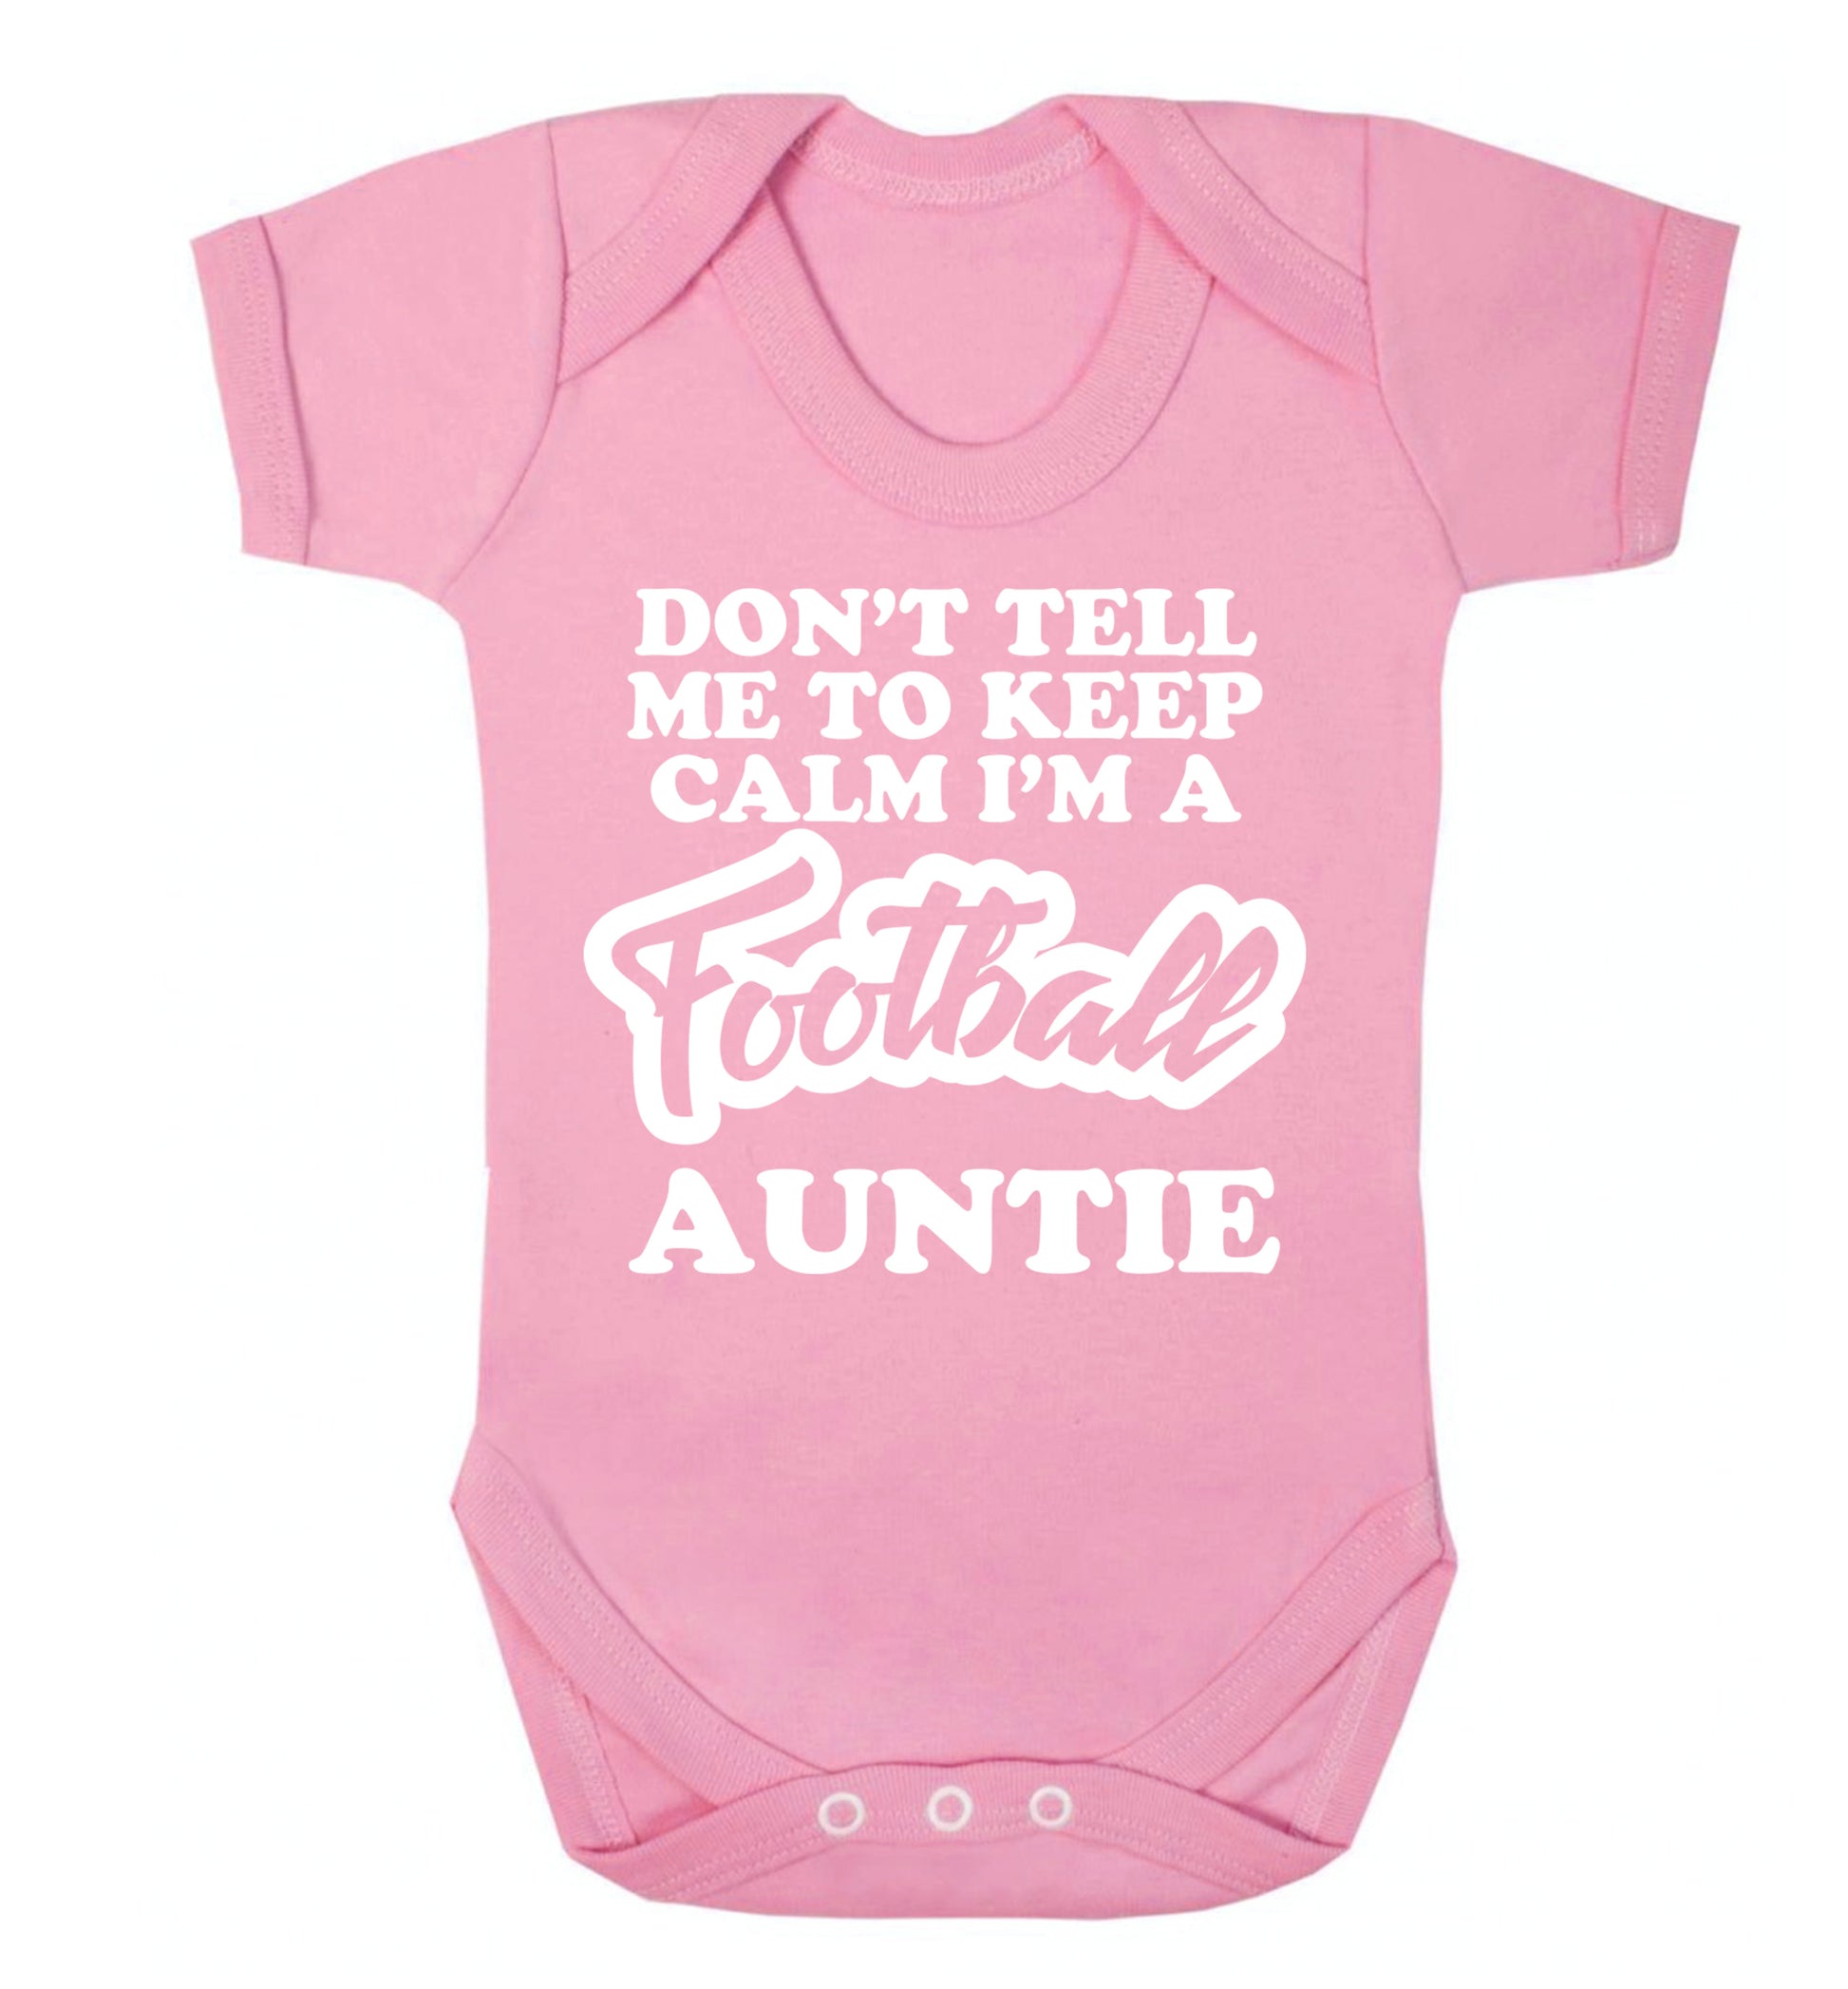 Don't tell me to keep calm I'm a football auntie Baby Vest pale pink 18-24 months